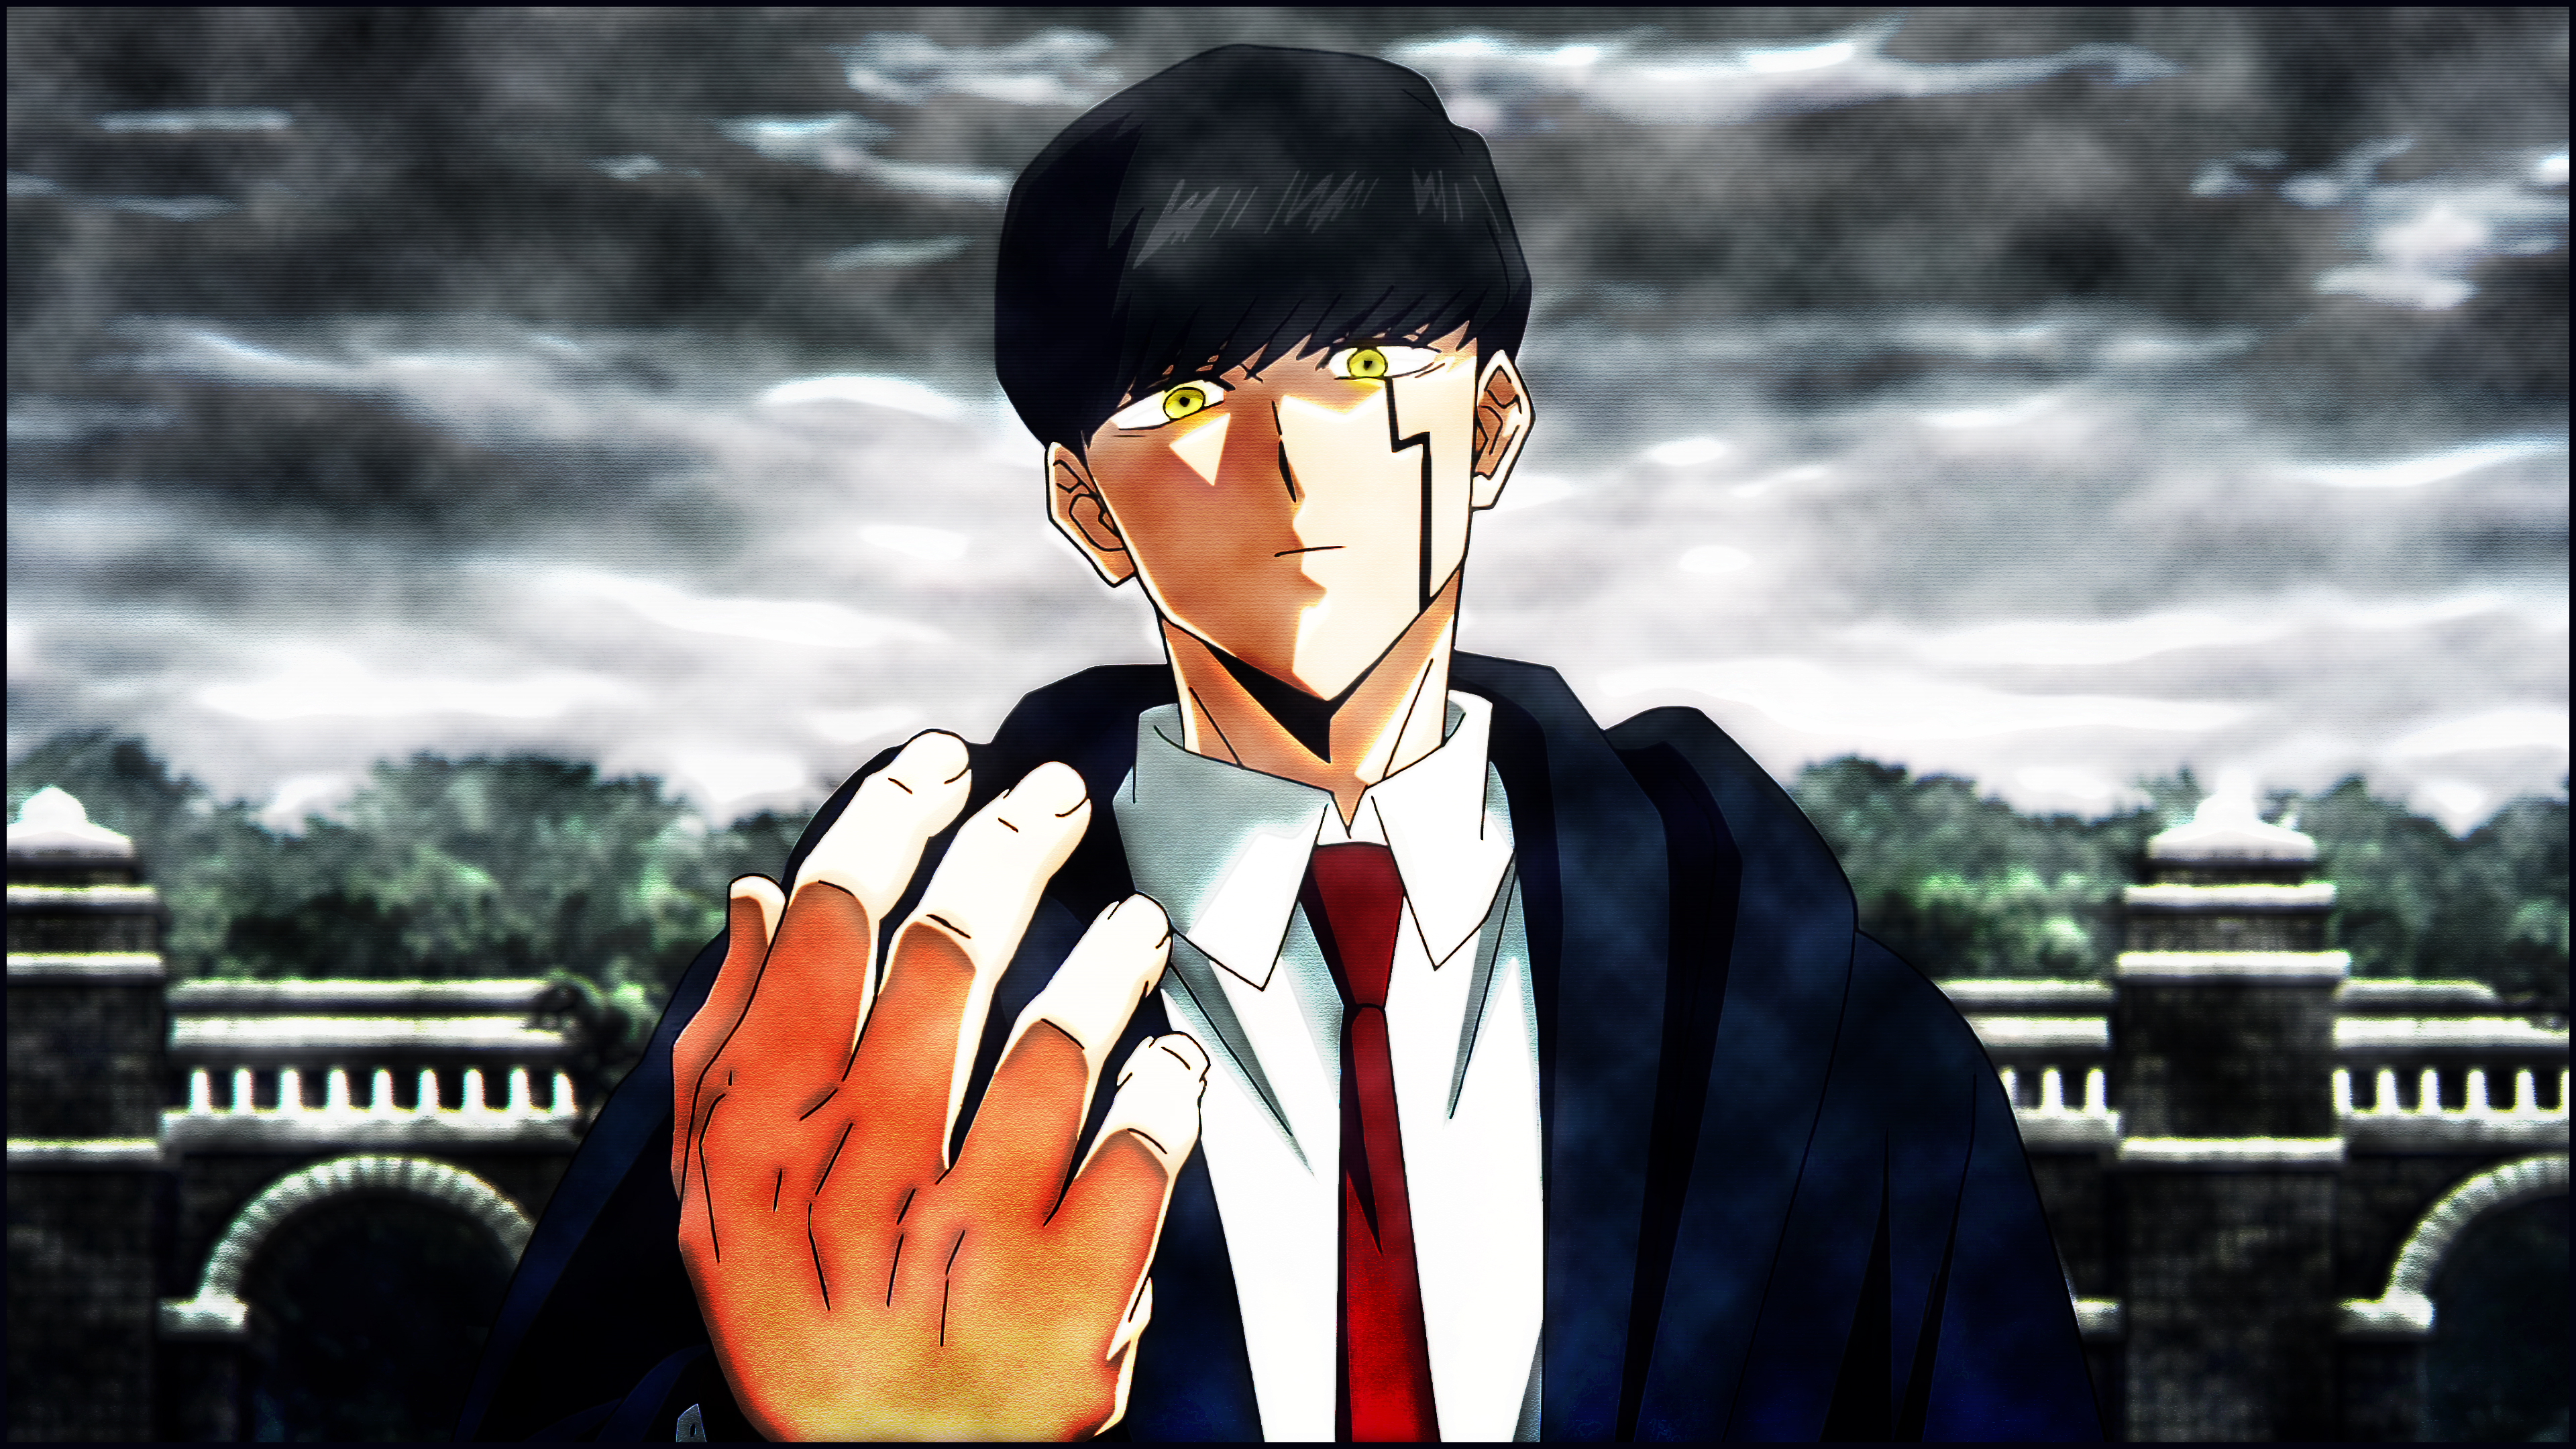 Anime 3840x2160 Mashle: Magic and Muscles Mash Burnedead anime anime girls black hair school uniform schoolboys looking at viewer overcast necktie collared shirt fingers closed mouth sky